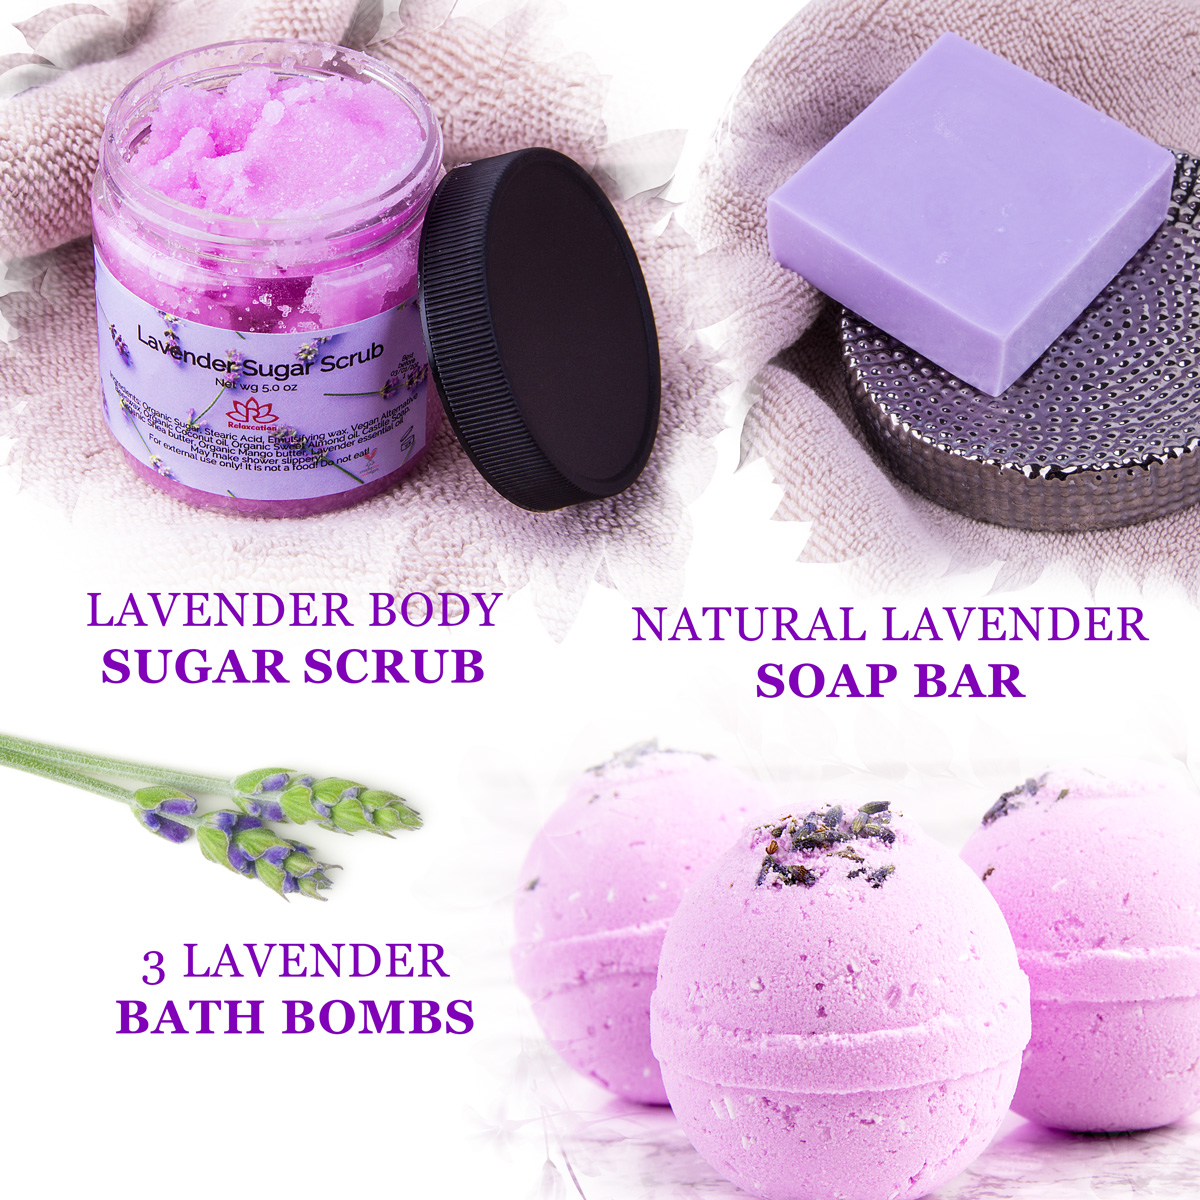 Lavender Spa Gift Set for Women Organic Home Spa Bath Basket Handmade in USA Natural and Safe by Relaxcation - image 2 of 8